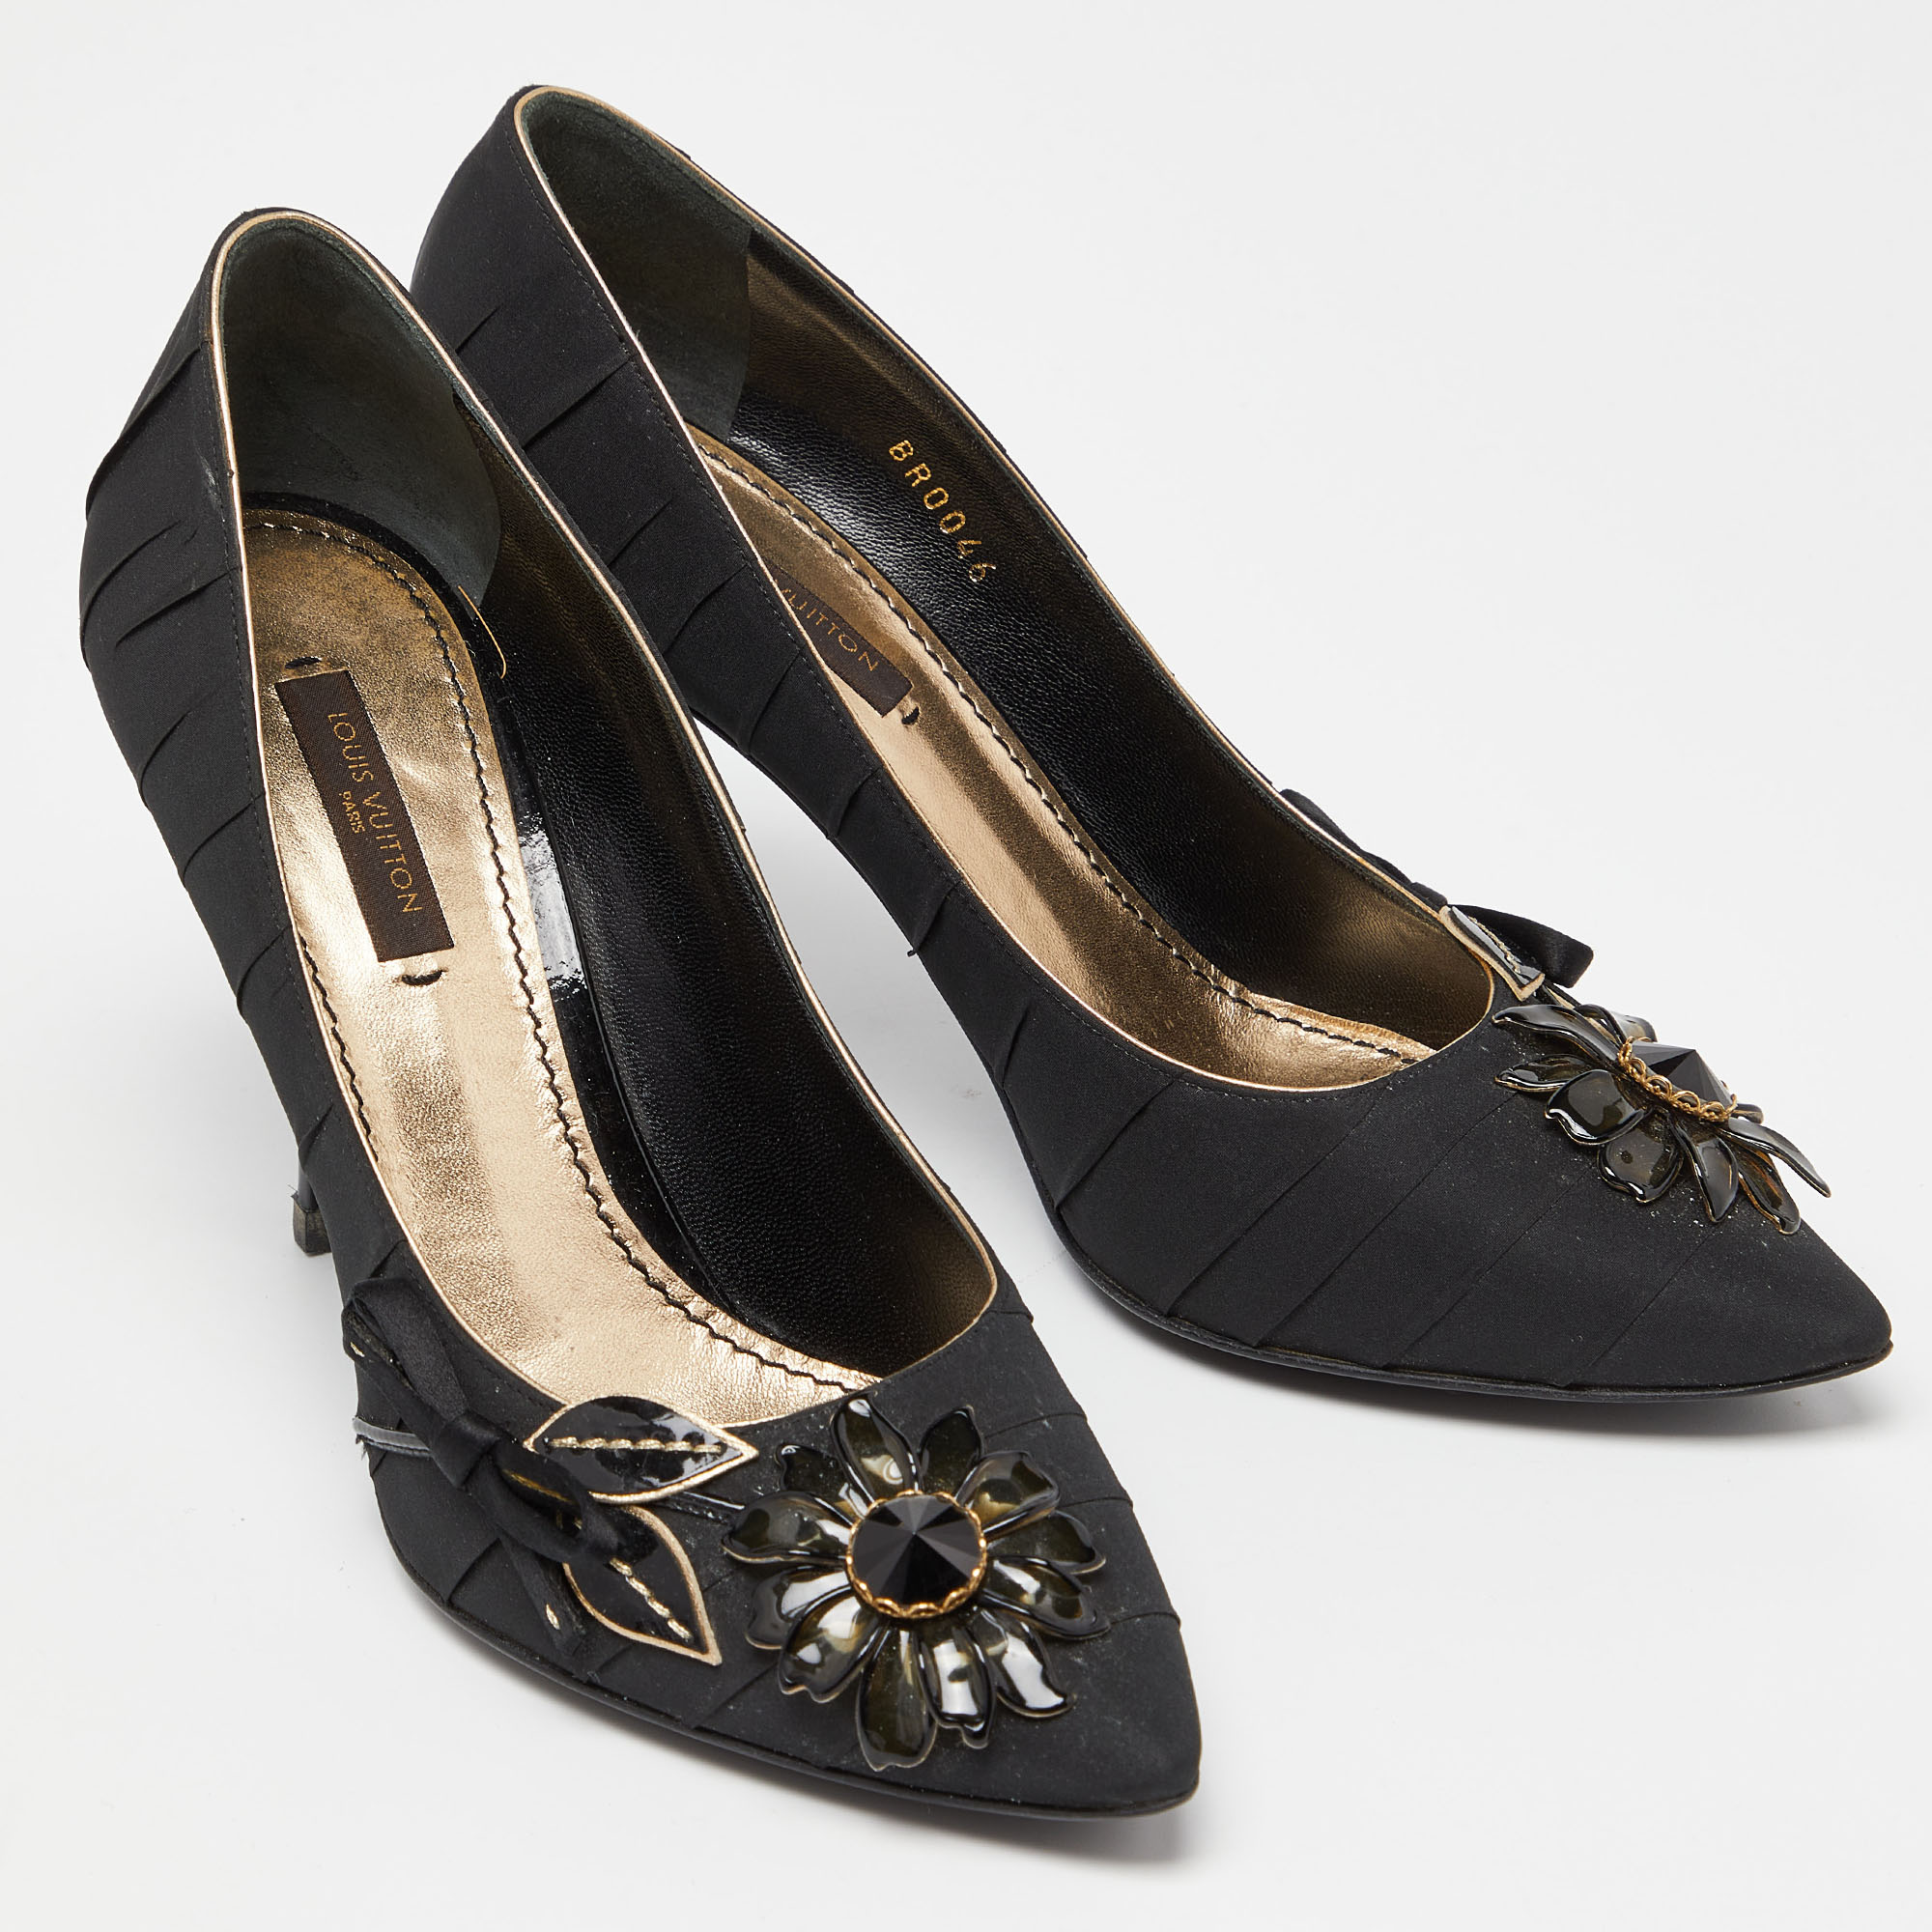 Louis Vuitton Black Pleated Satin Pointed Flower Embellished Pumps Size 37.5